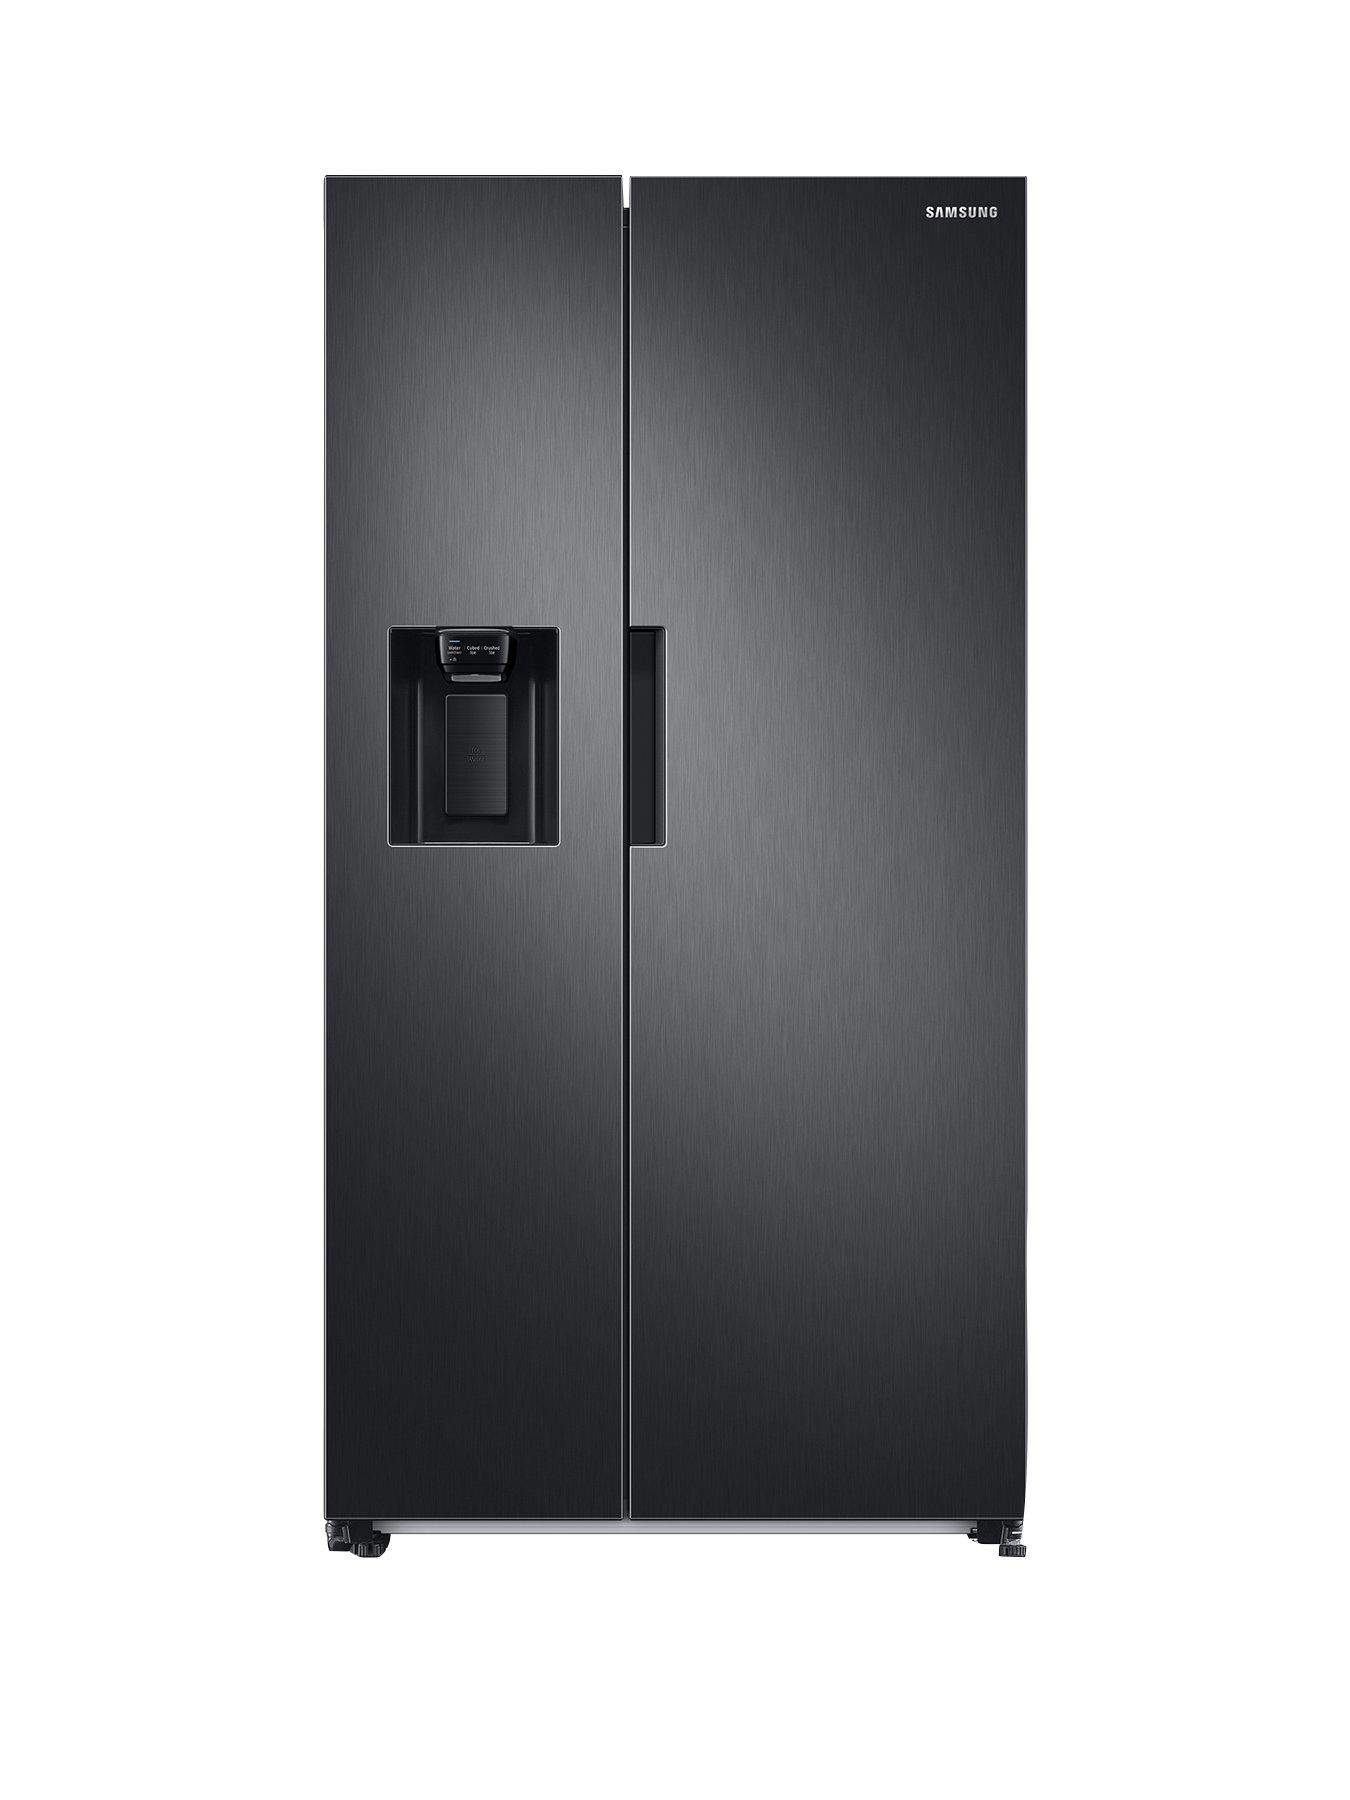 Samsung Series 7 Rs67A8810B1/Eu American Style Fridge Freezer With Spacemax Technology - Black Stainless